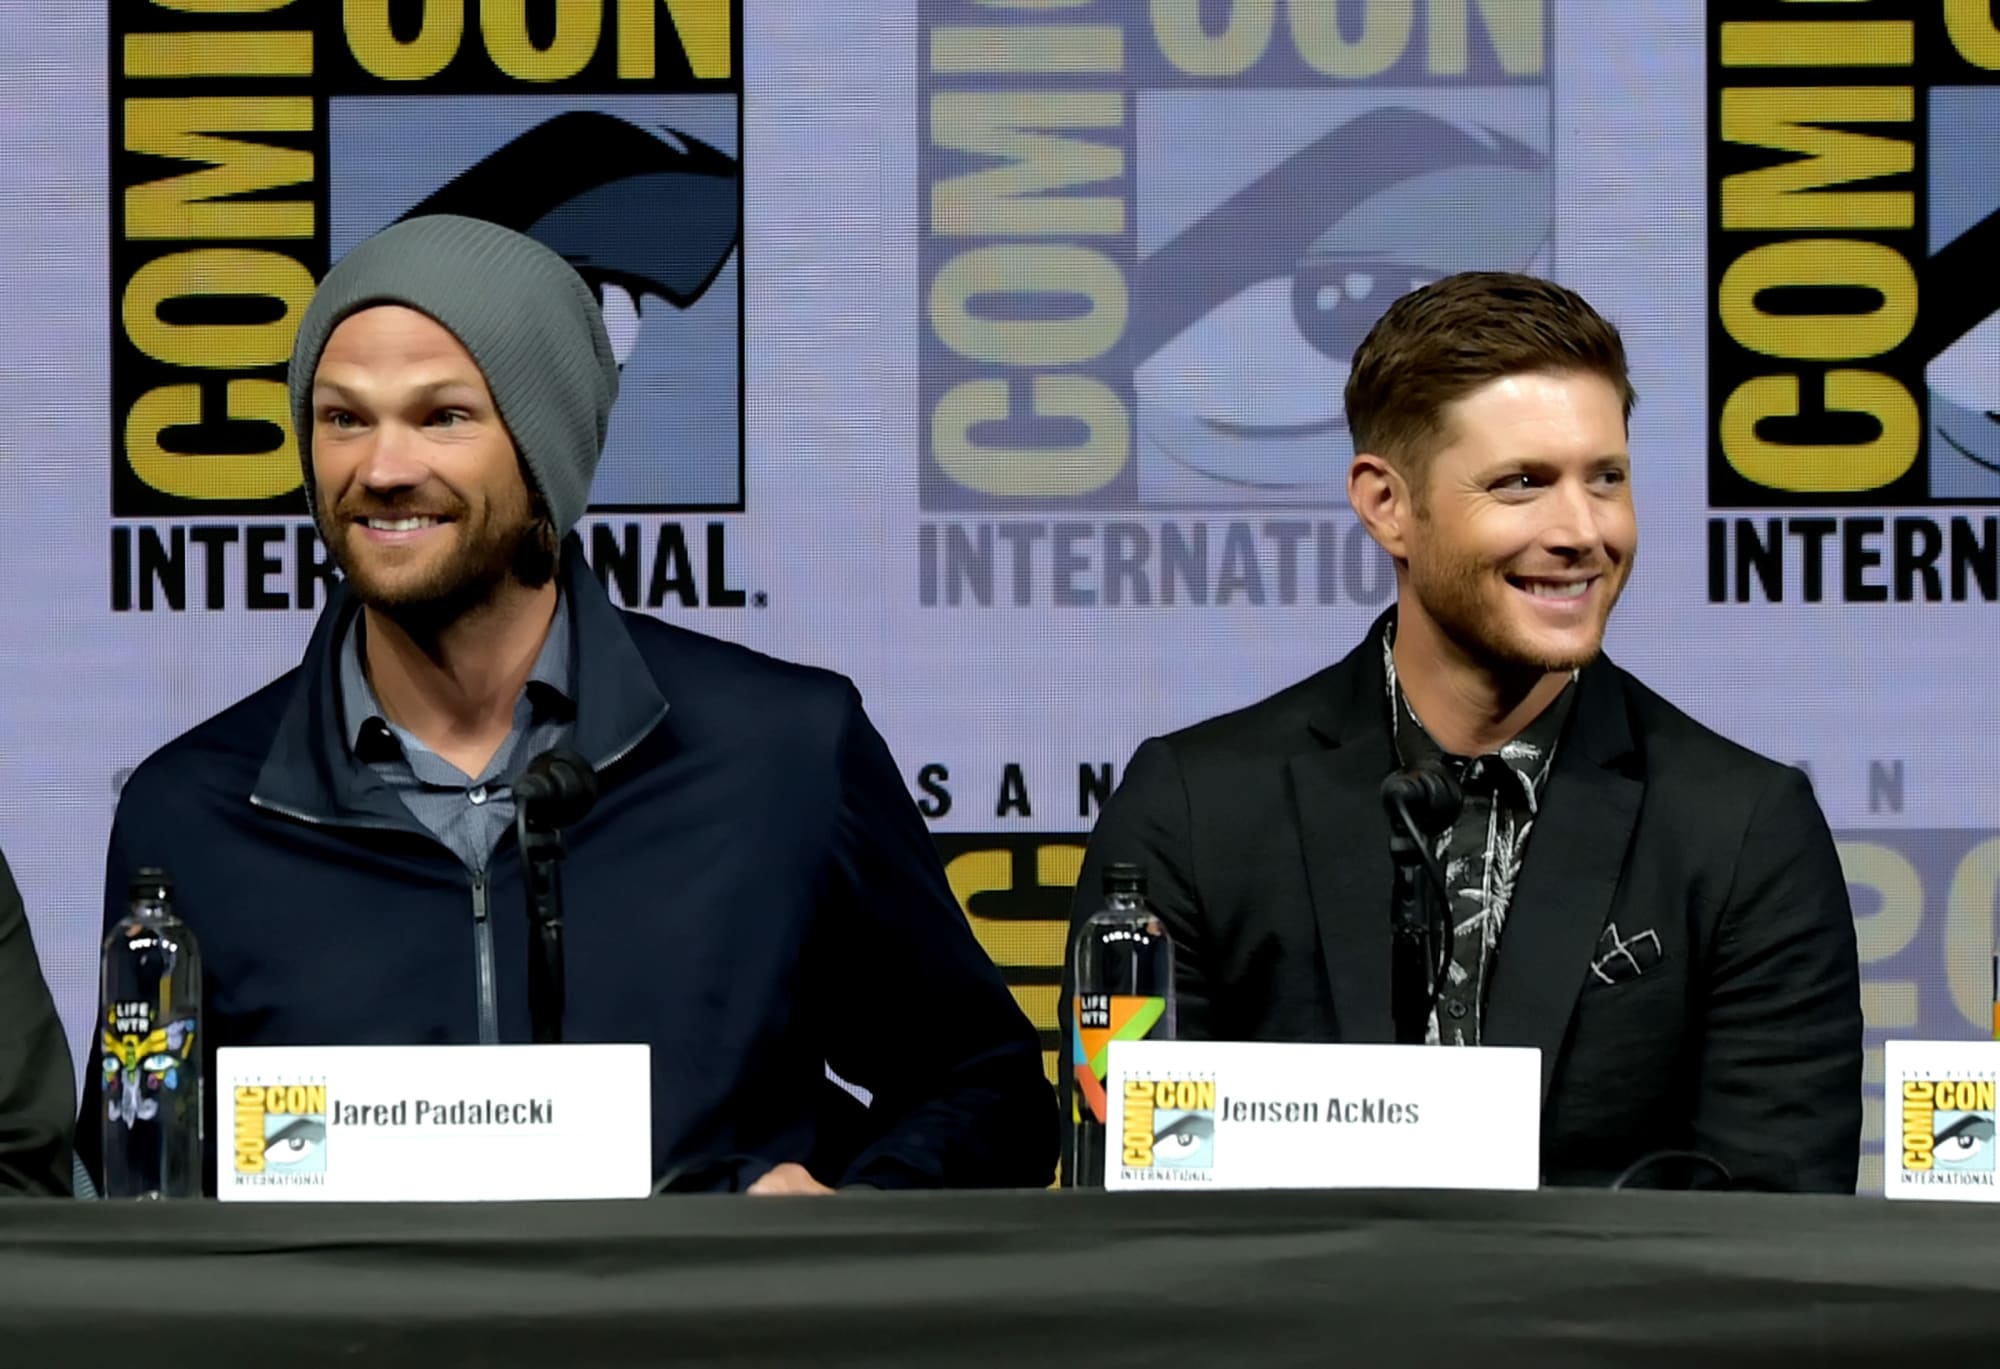 Supernatural conventions will continue after the show finishes